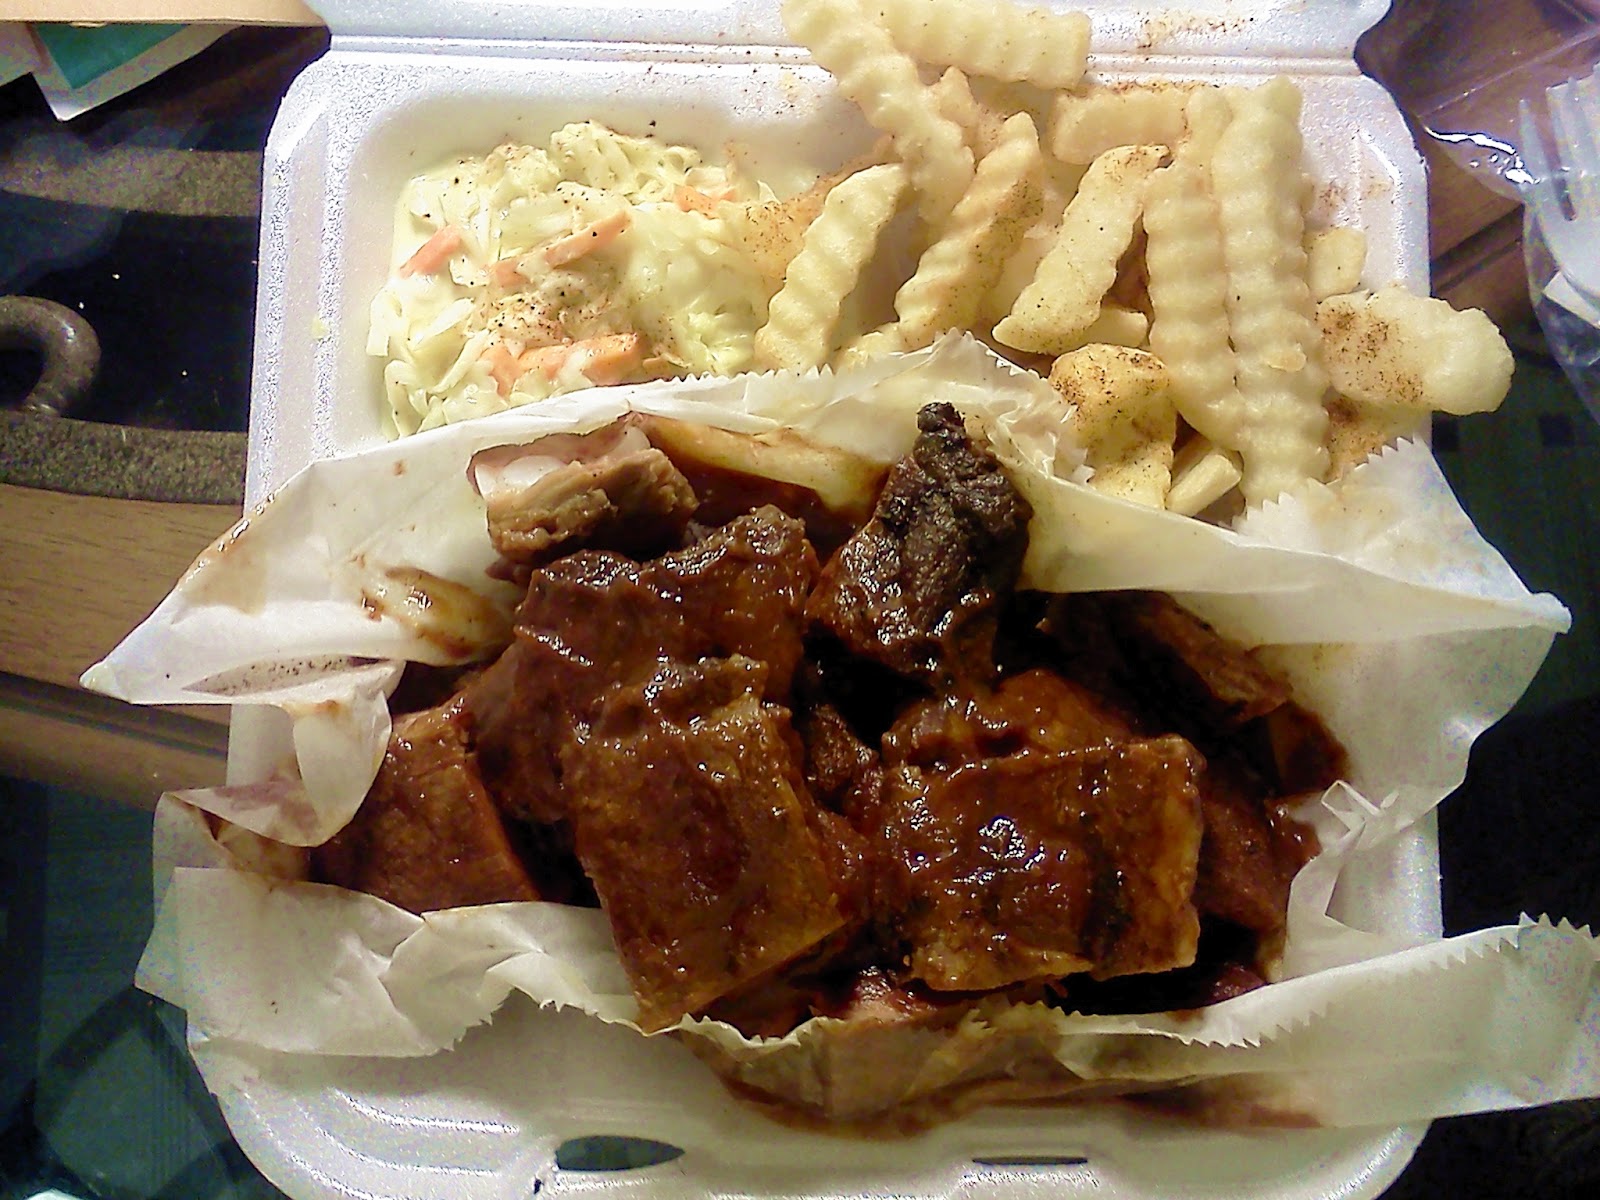 Barbecue Rib Tips from Kelvin's Hot Wings. The BBQ/wing joint has moved to Millington, Tennessee.